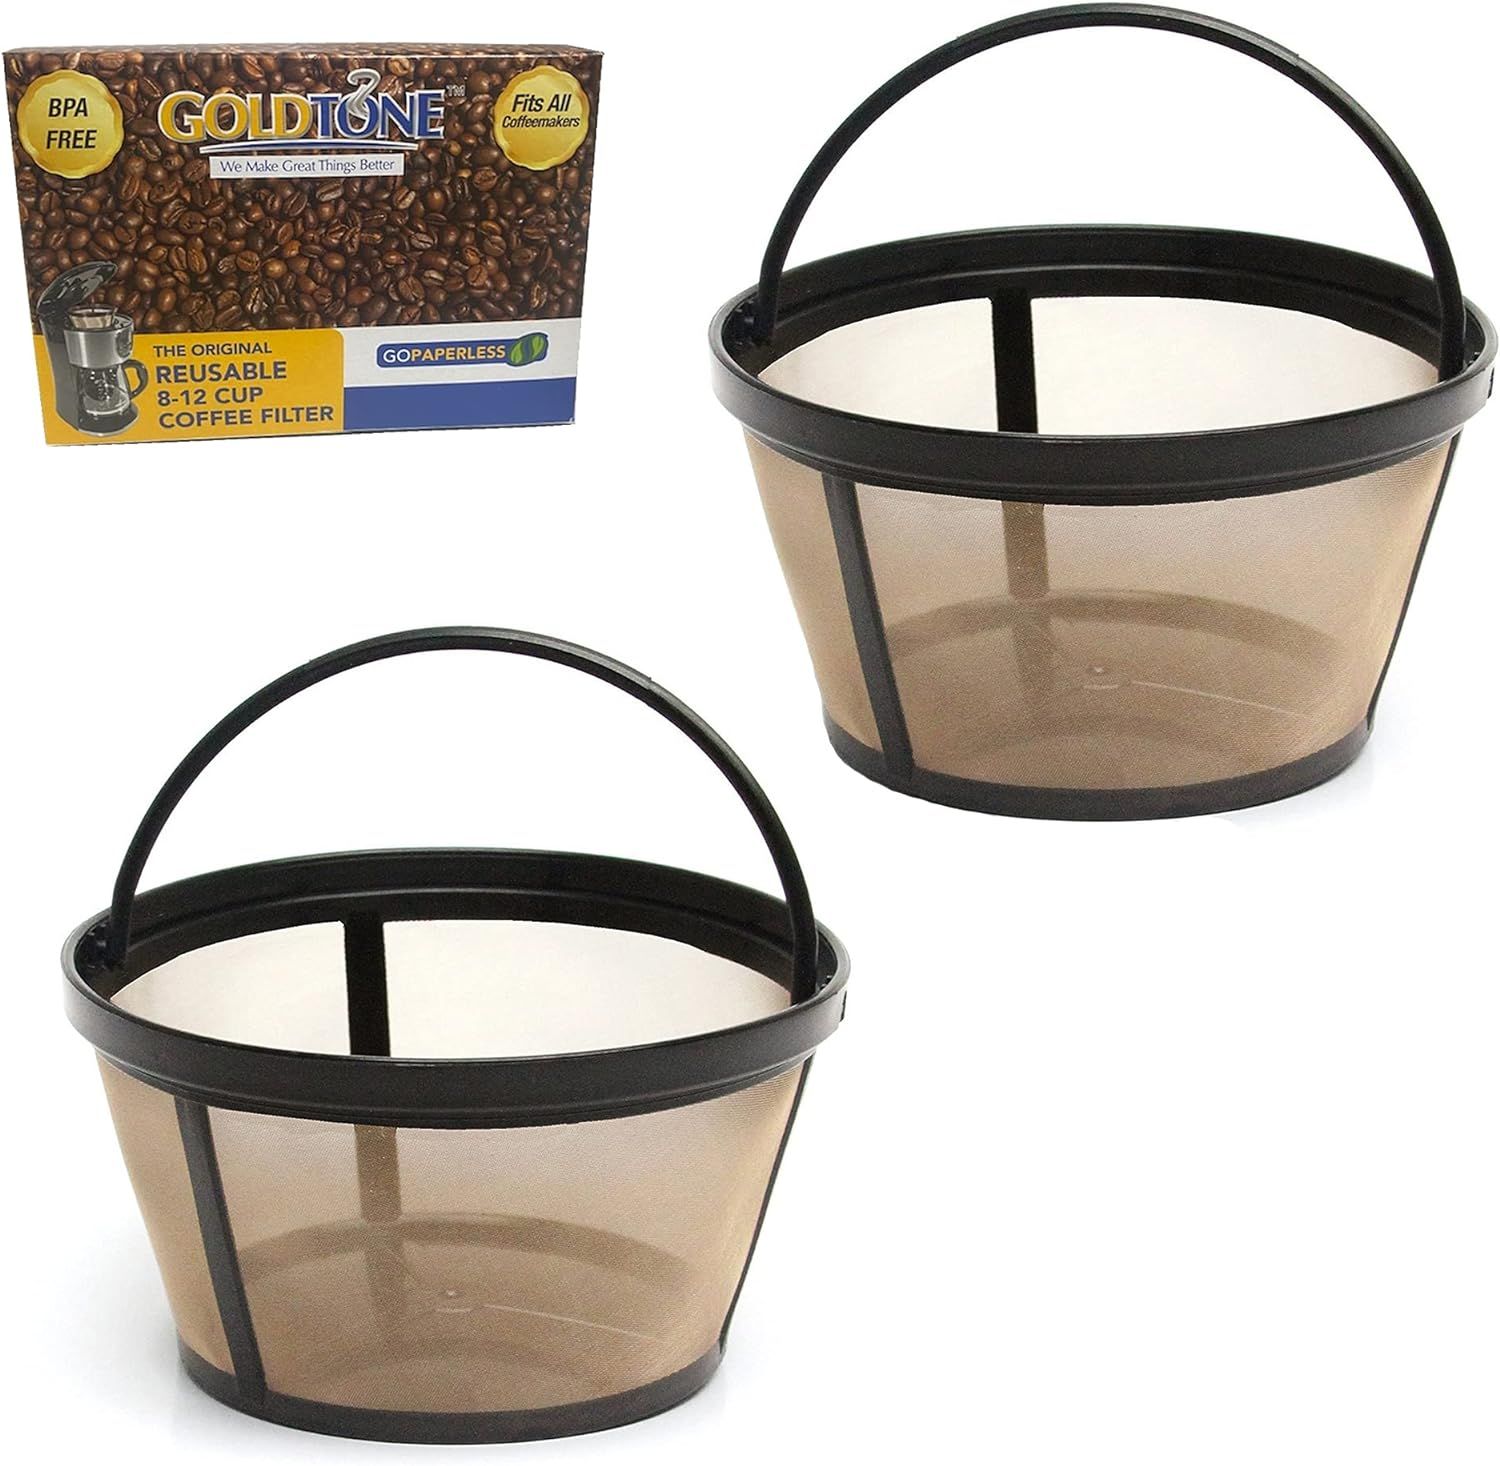 GoldTone Brand Reusable 8-12 Cup Basket Coffee Filter fits Mr. Coffee Makers and Brewers. Replace... | Amazon (US)